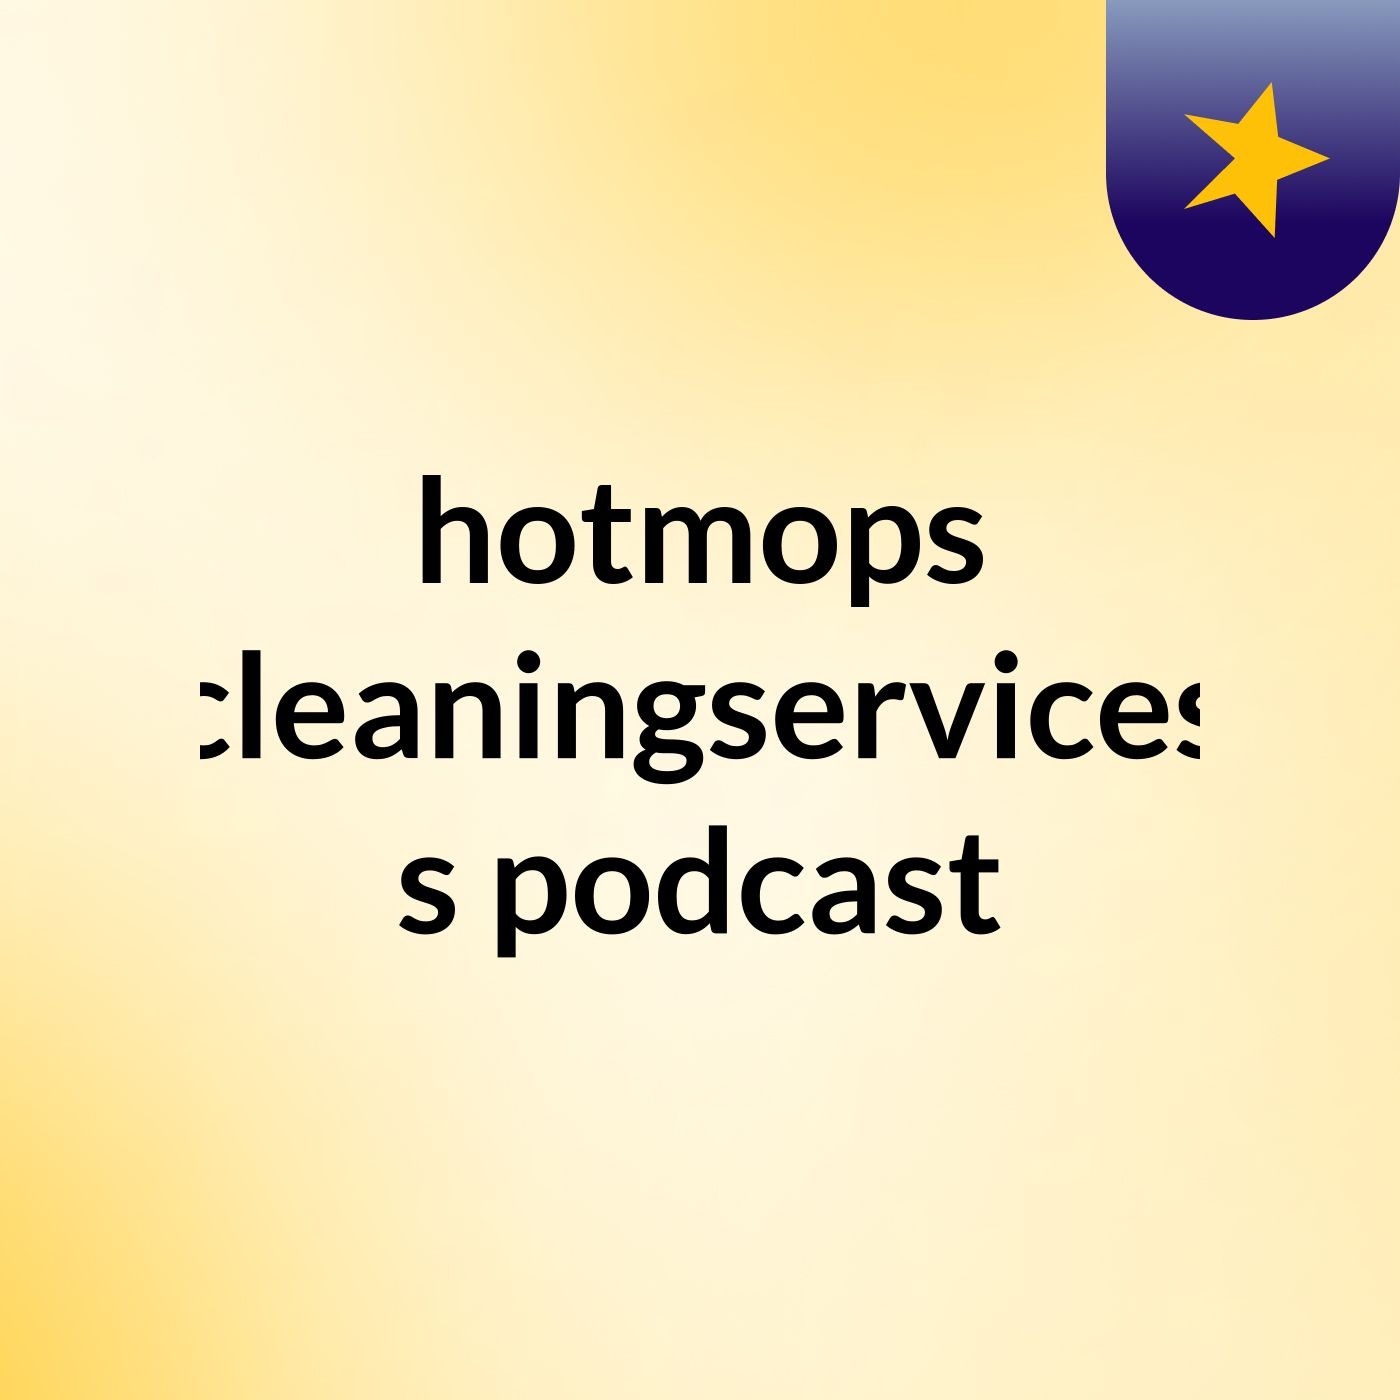 Episode 3 - hotmops cleaningservices's podcast